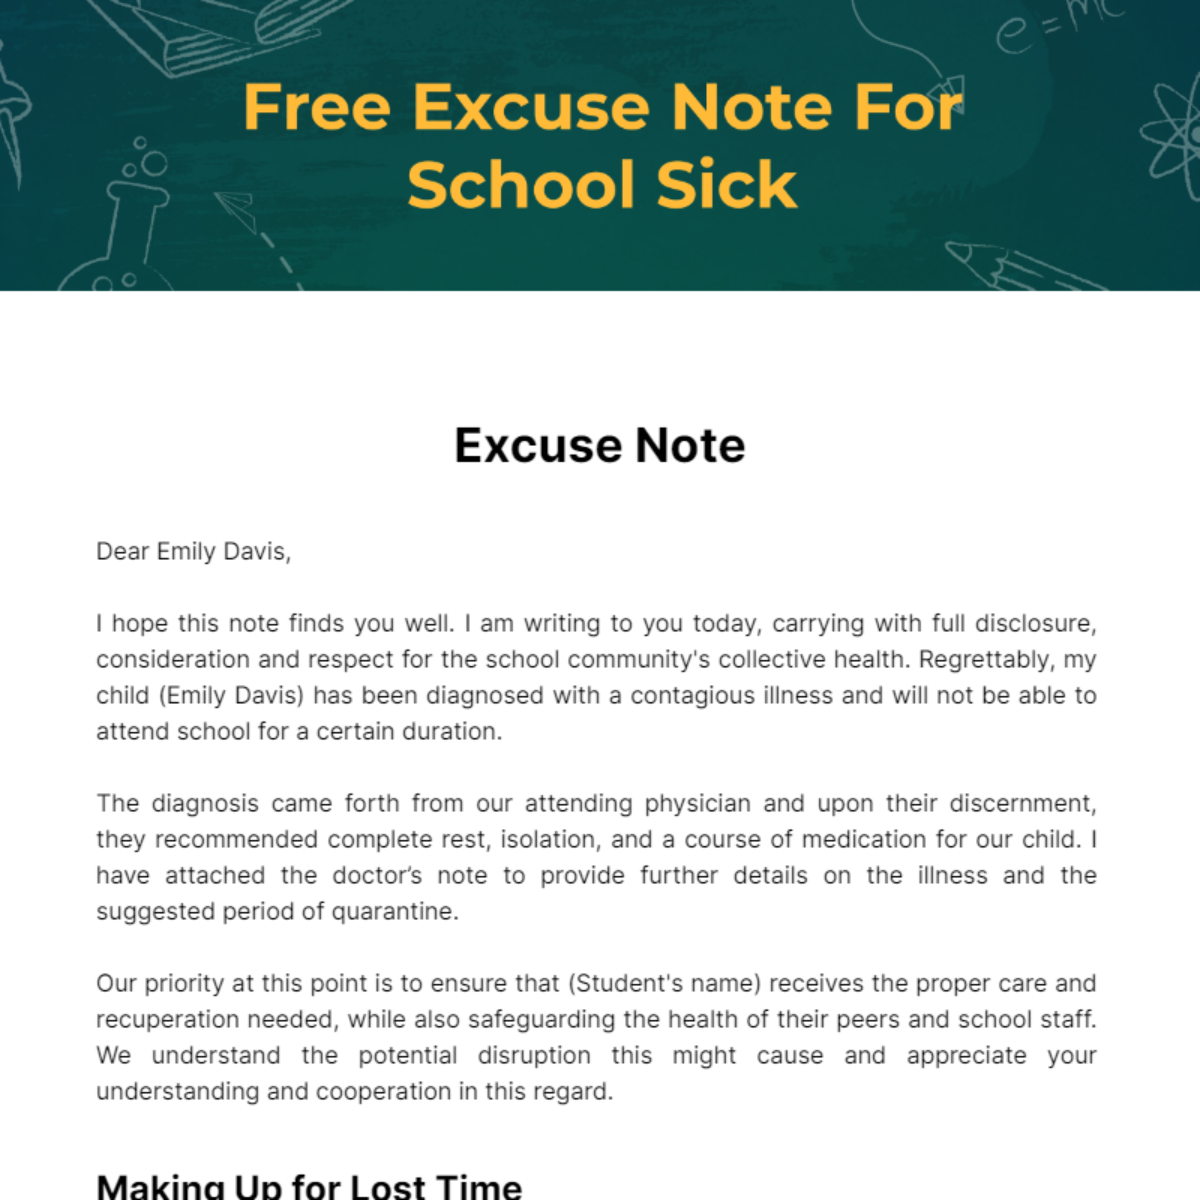 Free Excuse Note For School Sick Template